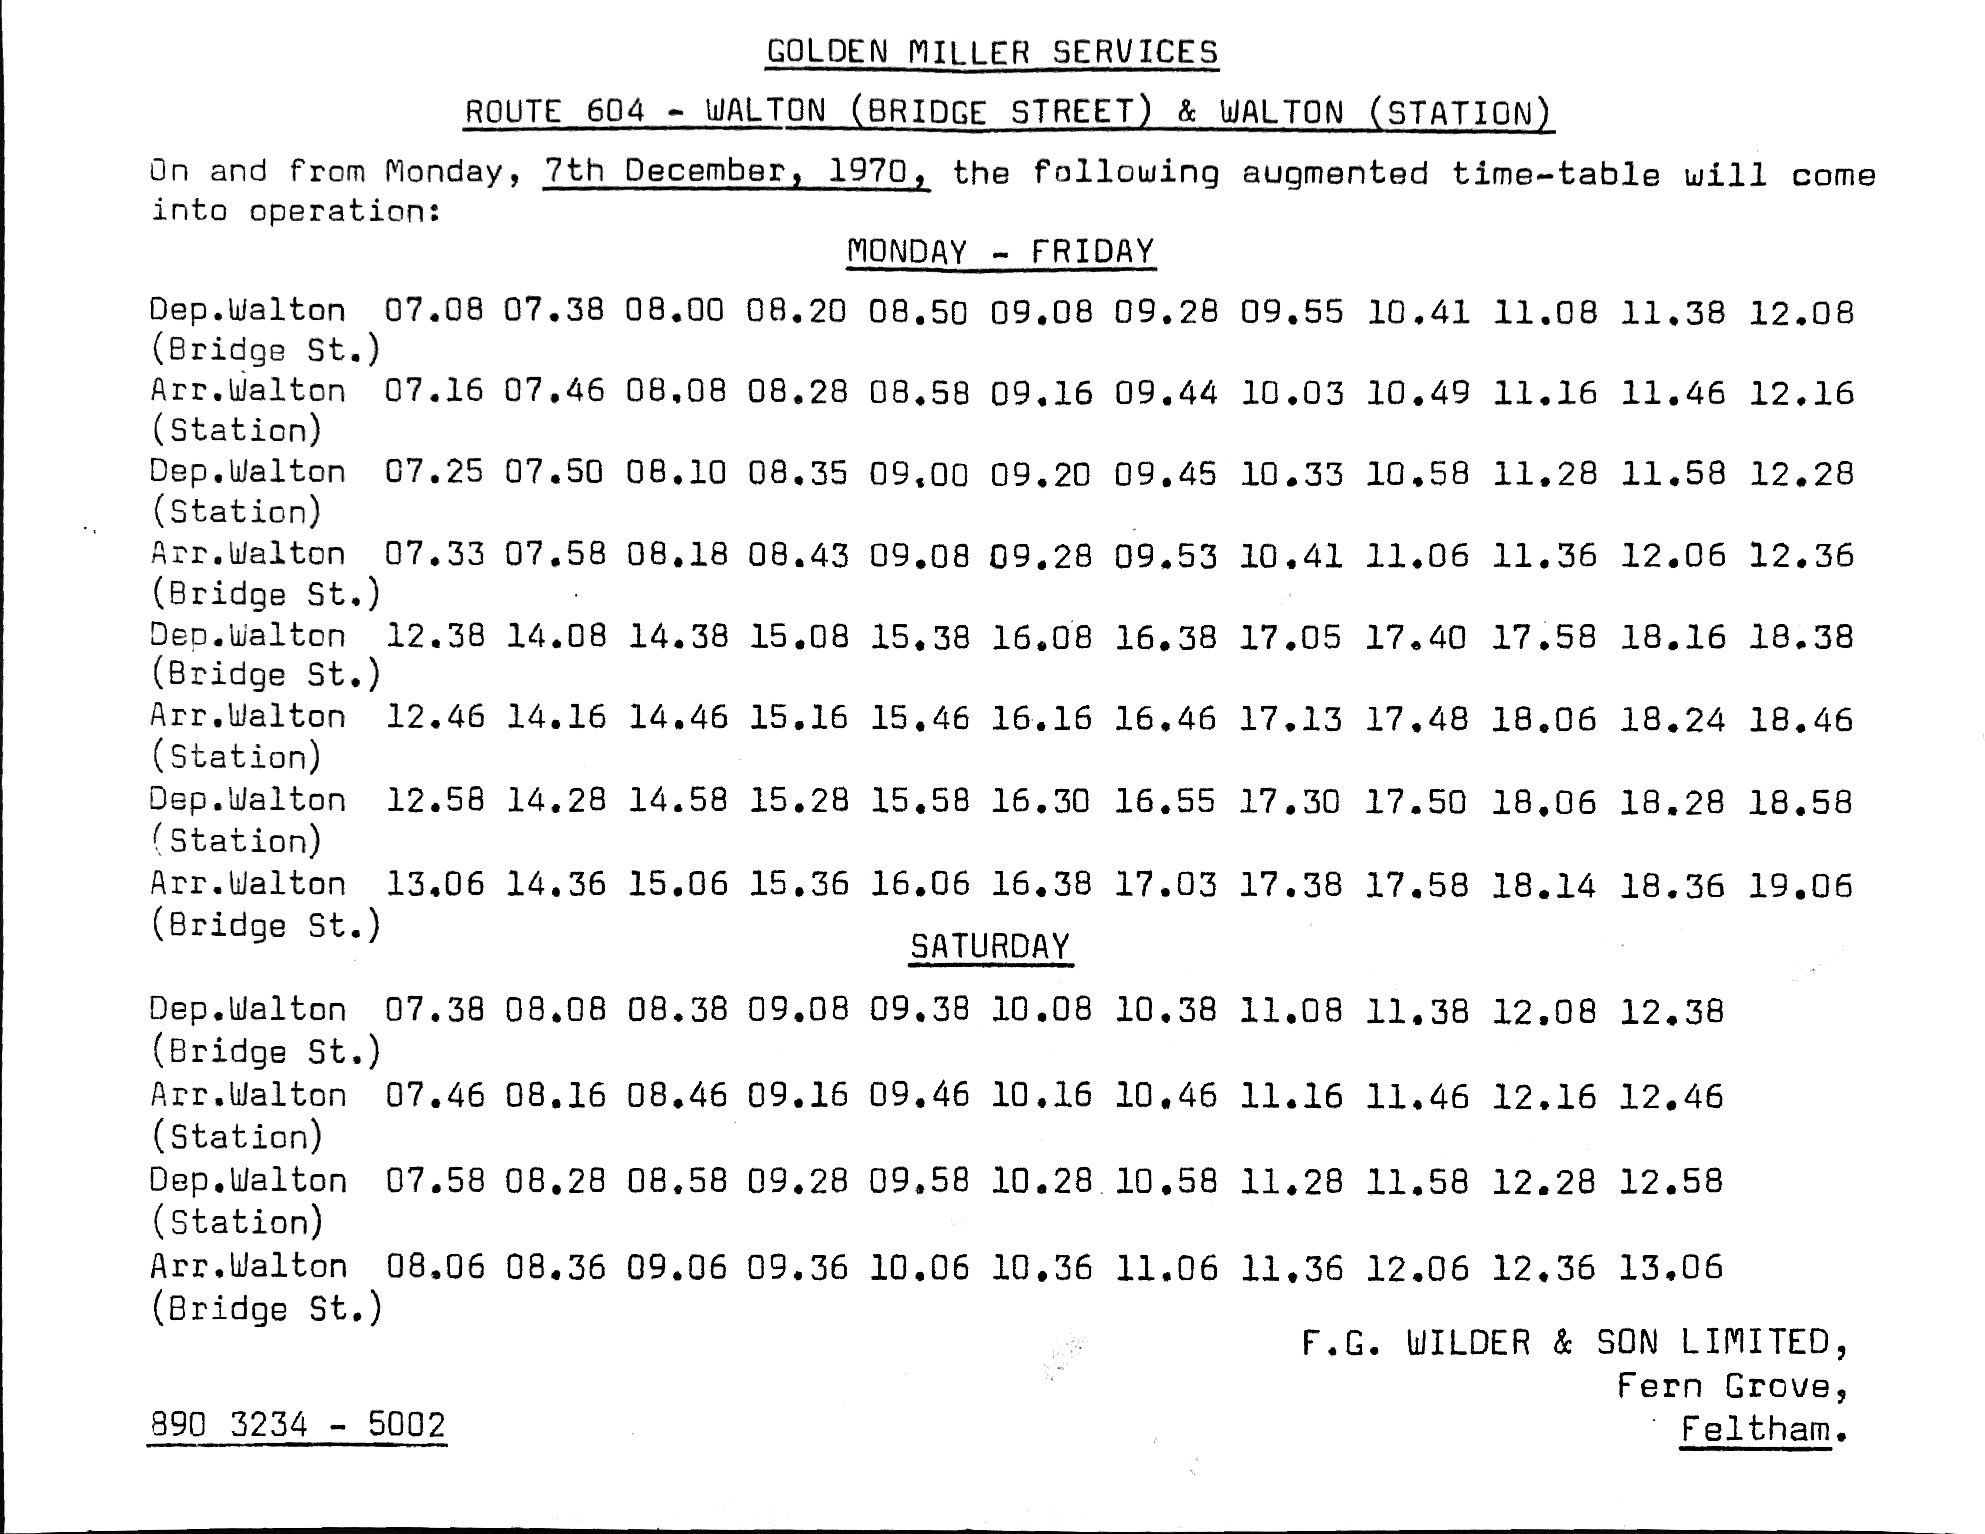 first Gilden Miller timetable 1970 takeover of Walton local service